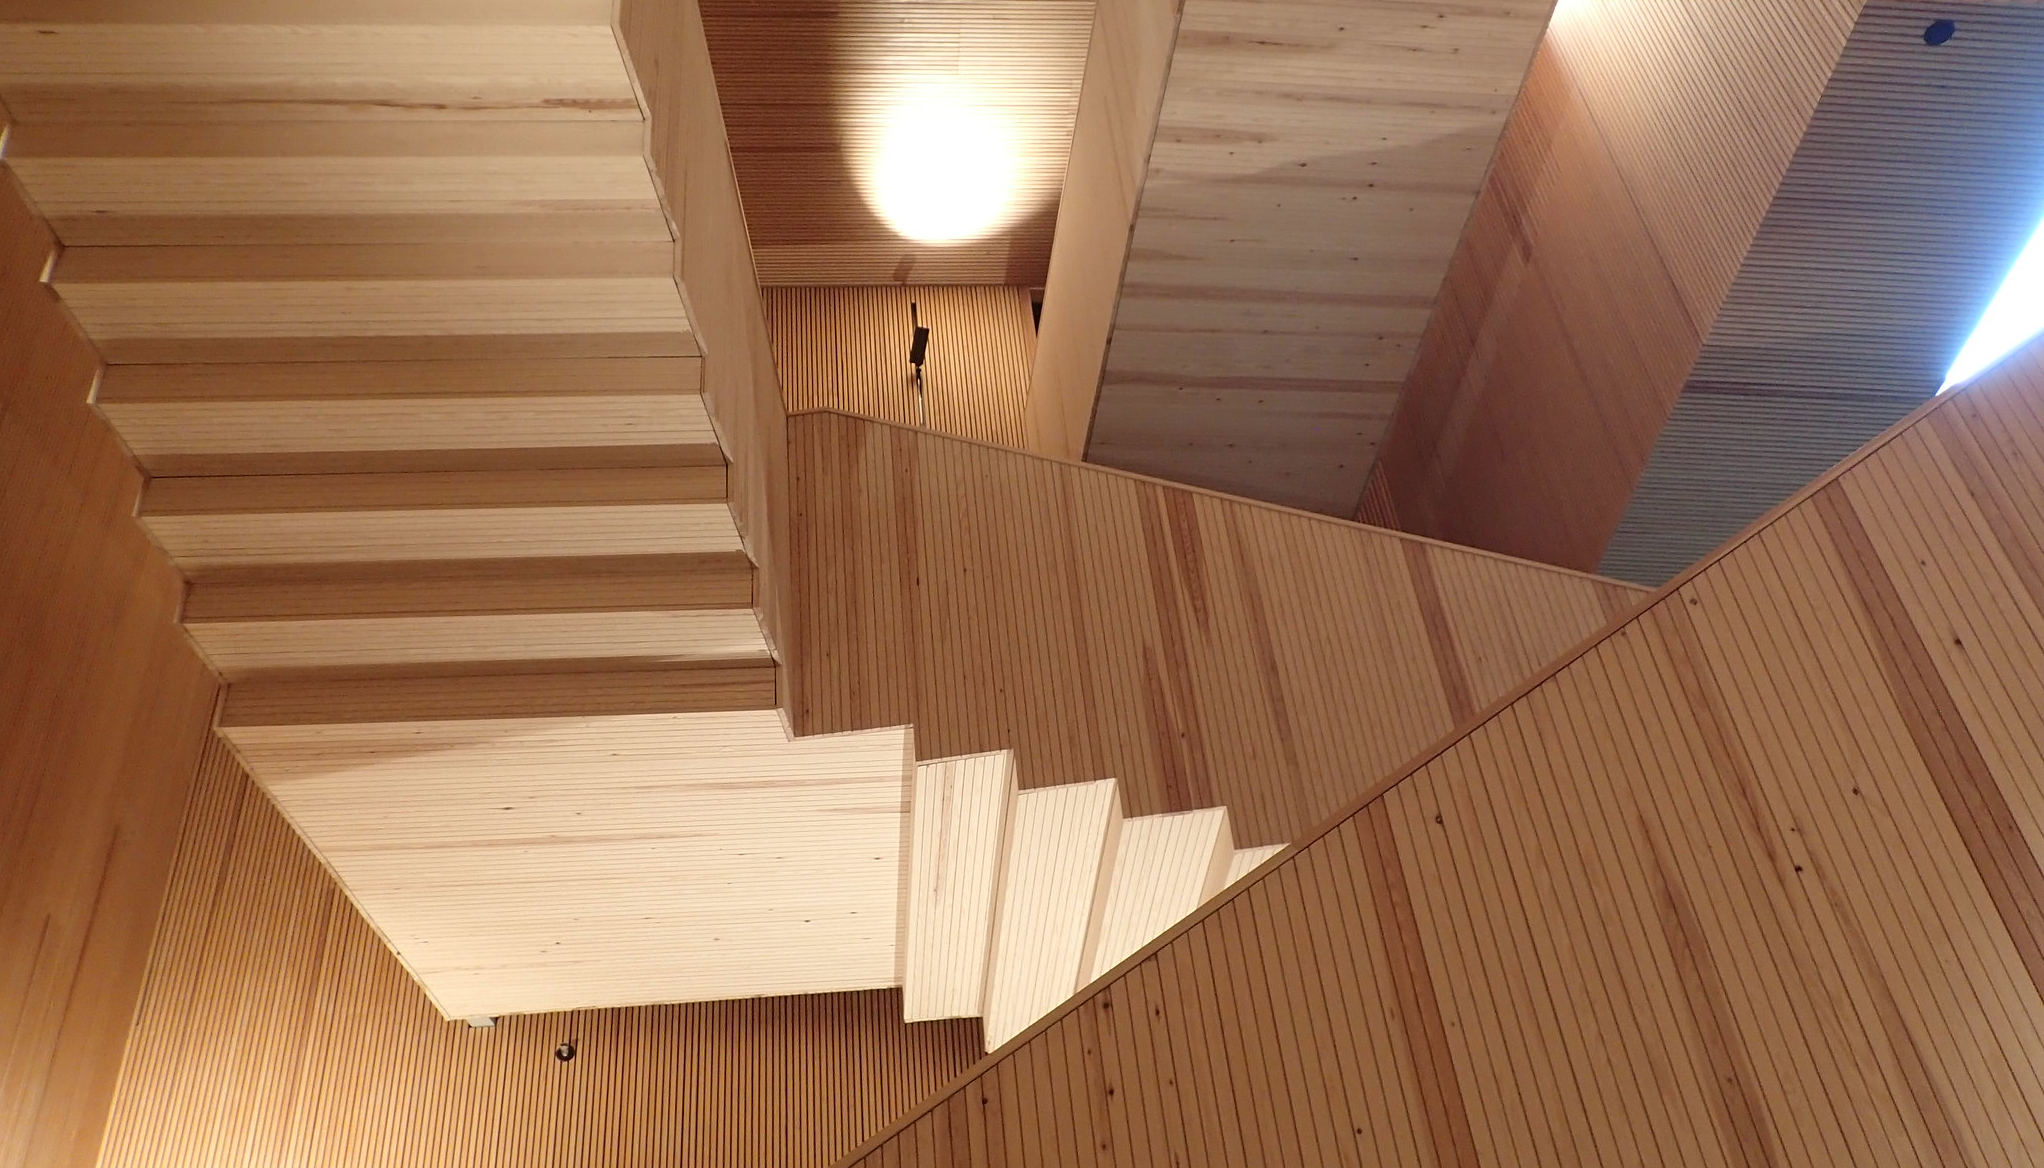 Photo of the Think Corner staircase looking upwards - it looks like a flight of stairs upside down!